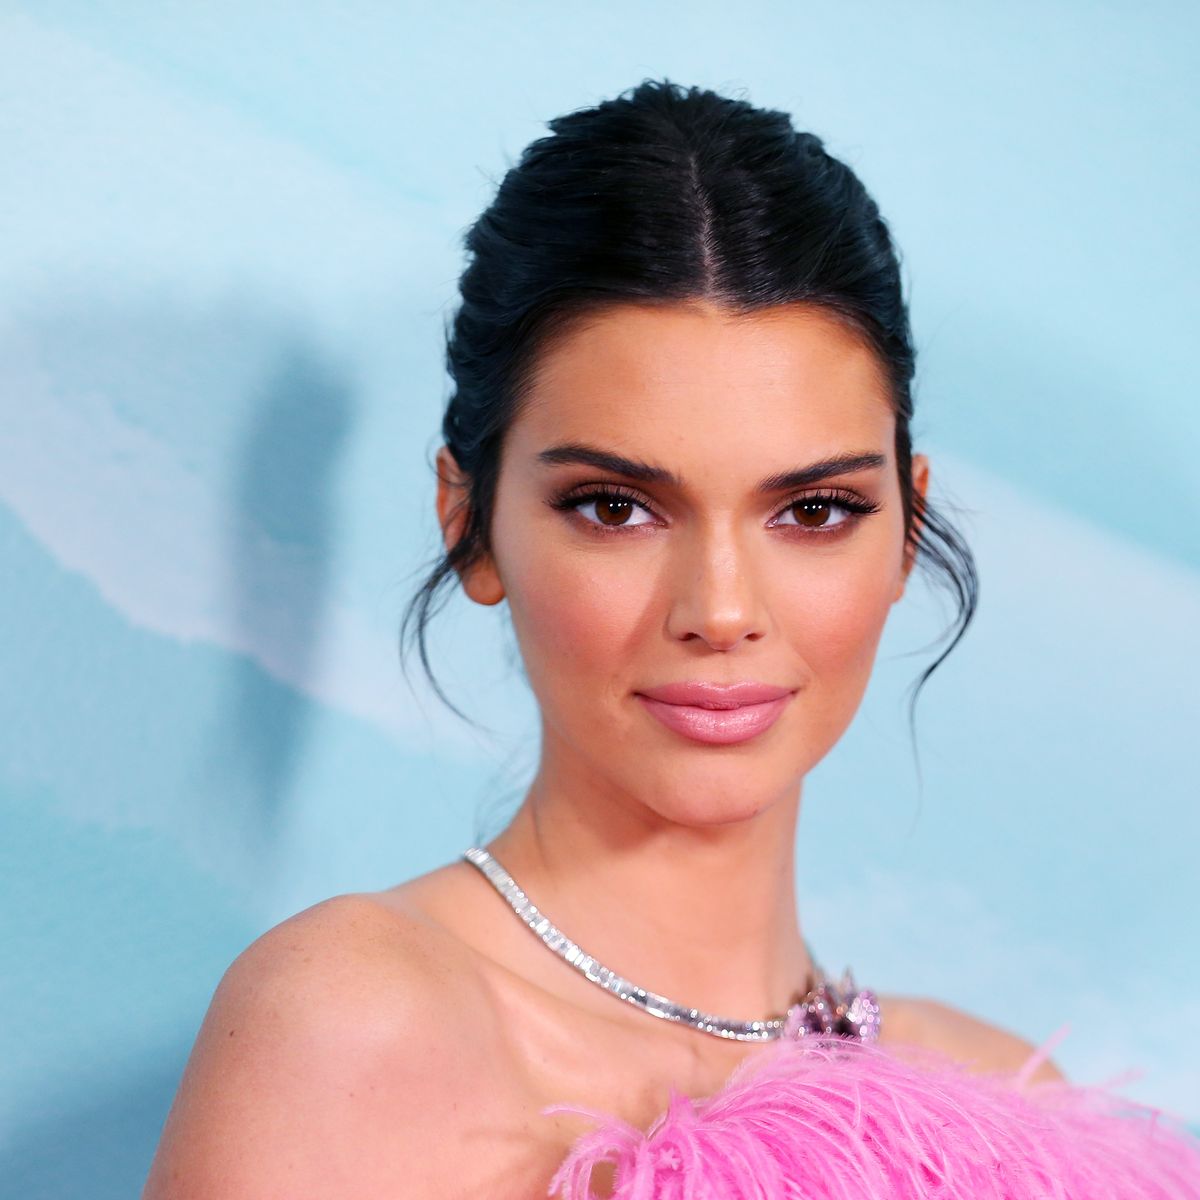 Kendall Jenner's Bum Bag Is The 90s Trend We Didn't Know We Needed